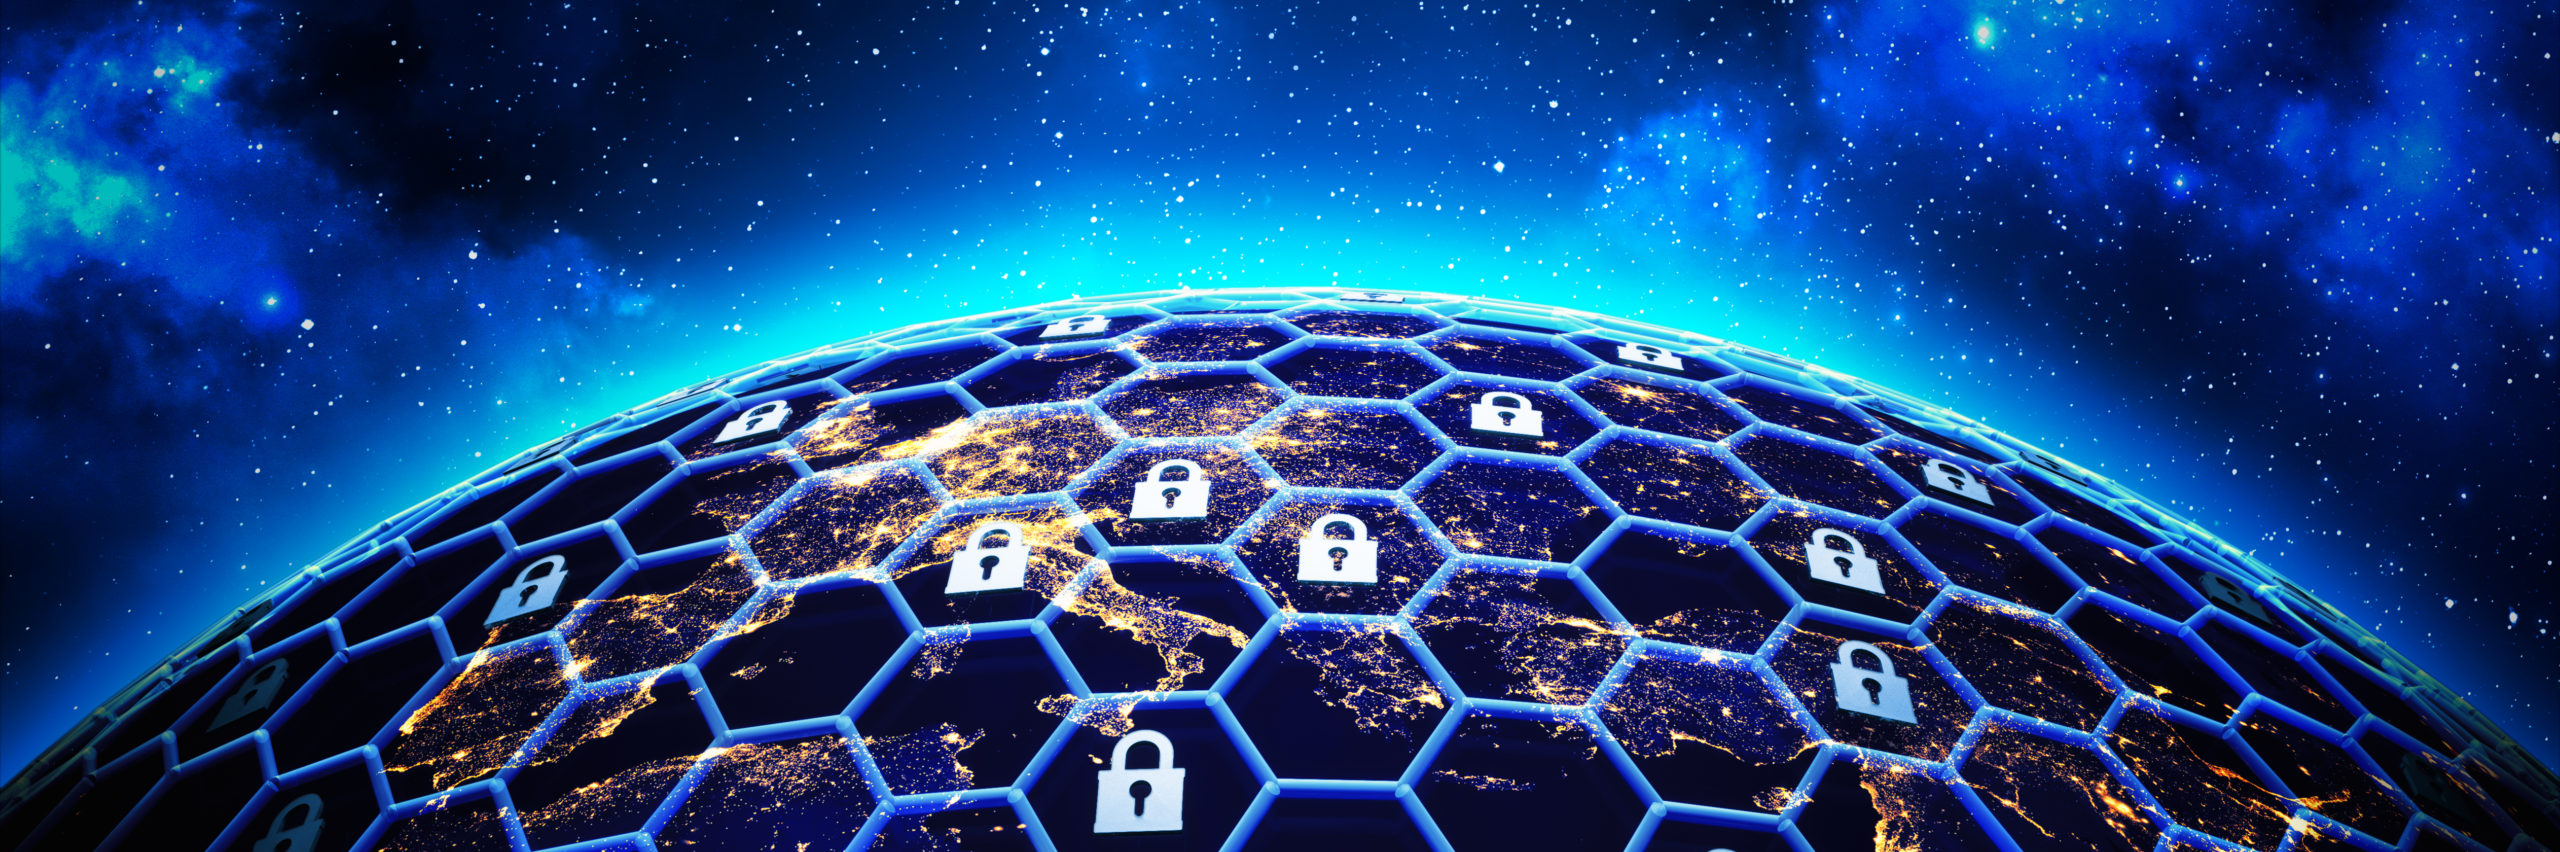 Global network security and data protection concept, a grid of cells with a lock symbol in some of them around the Earth globe on deep blue space background, 3d illustration - Illustration